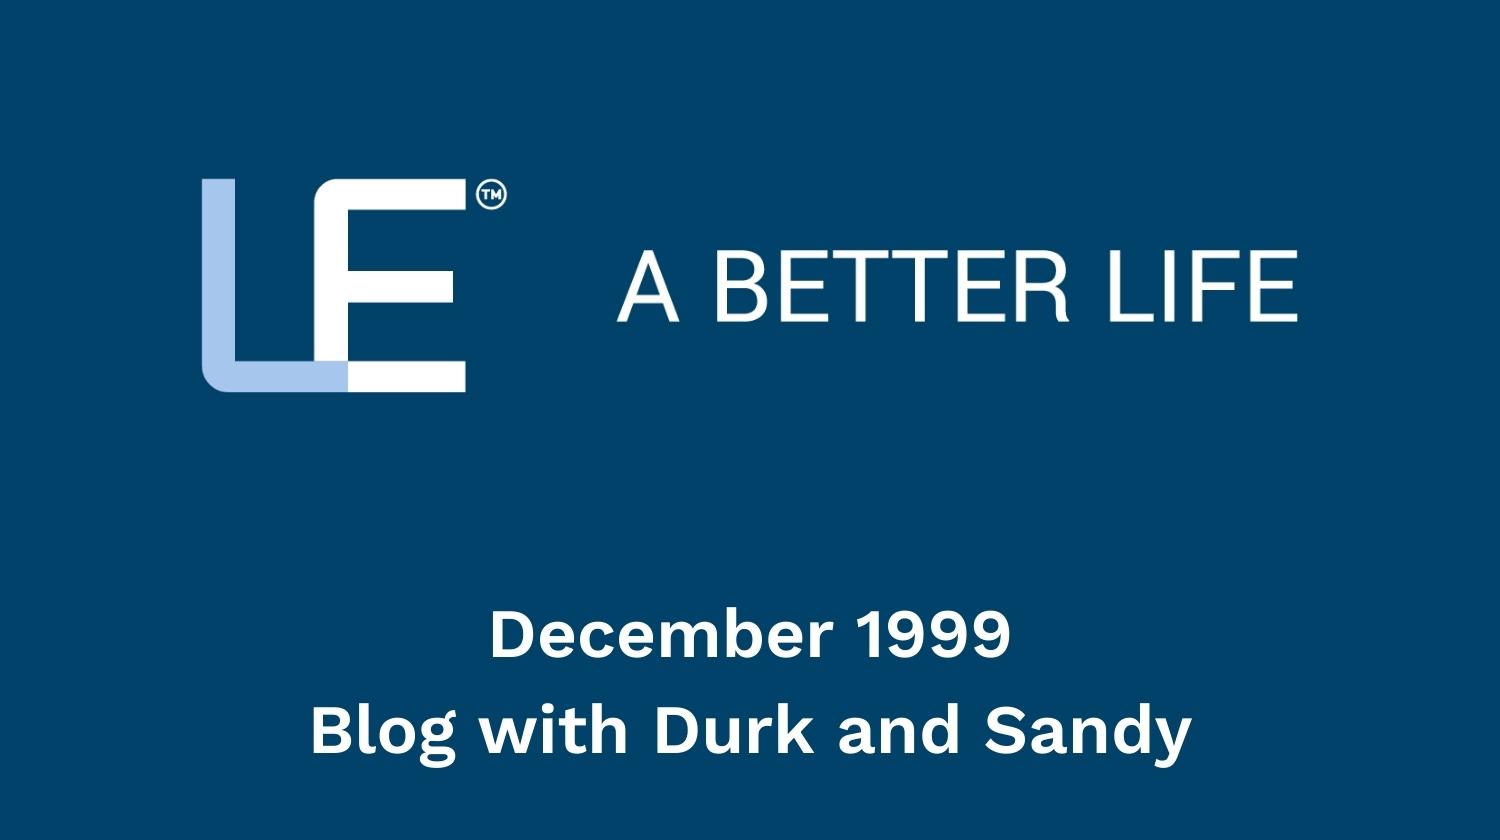 December 1999 Blog with Durk and Sandy